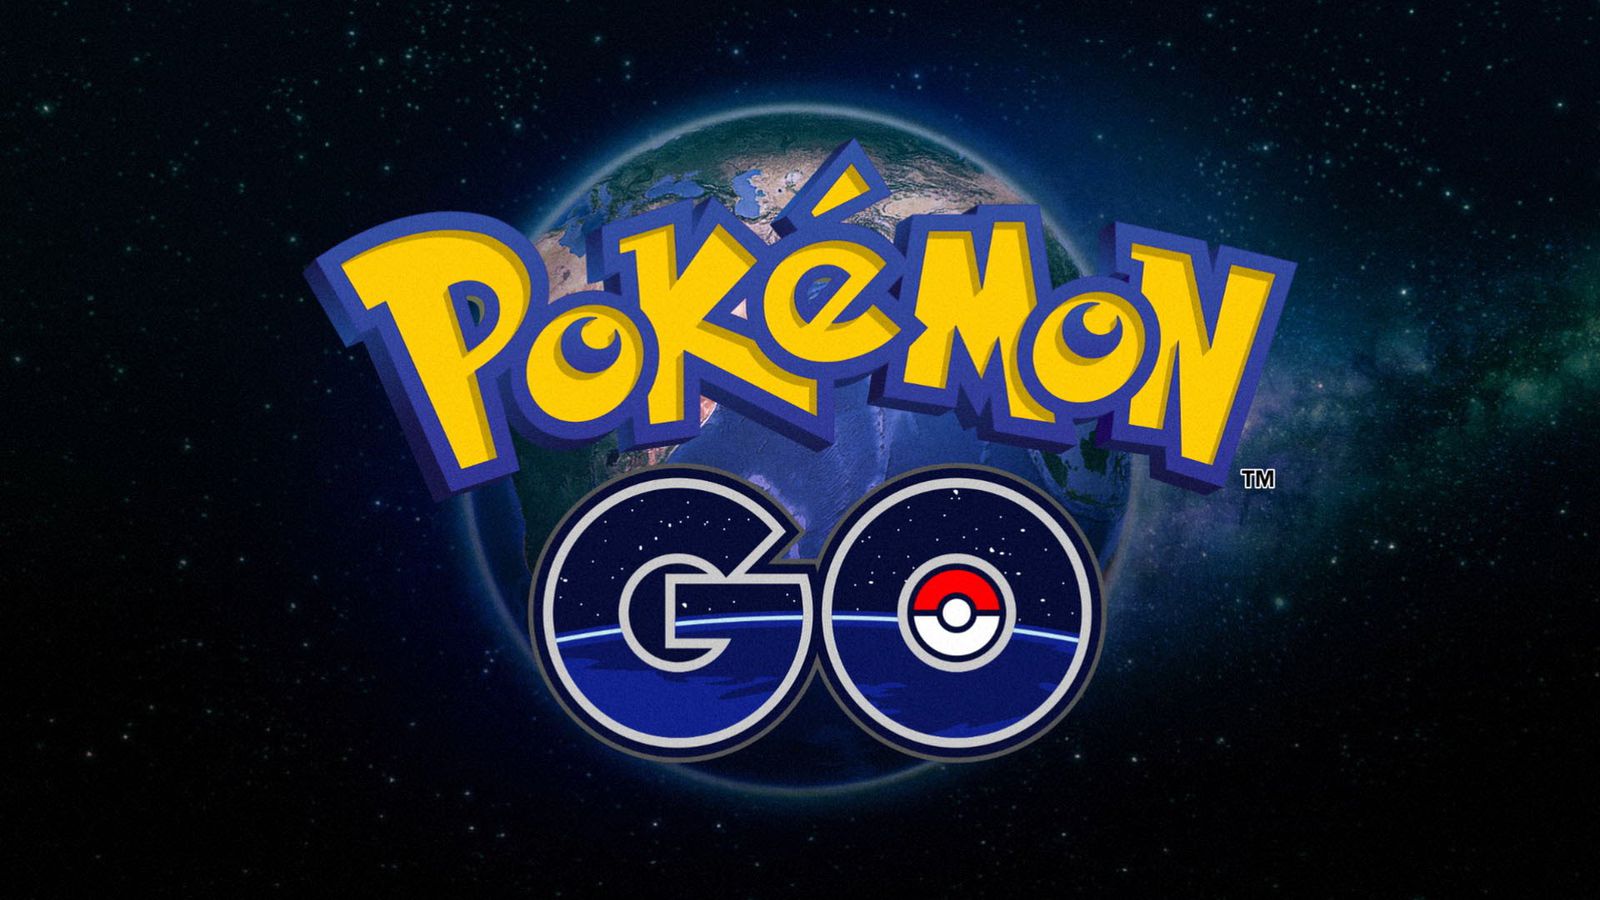 With Pokemon Go, Nintendo on the rise again!